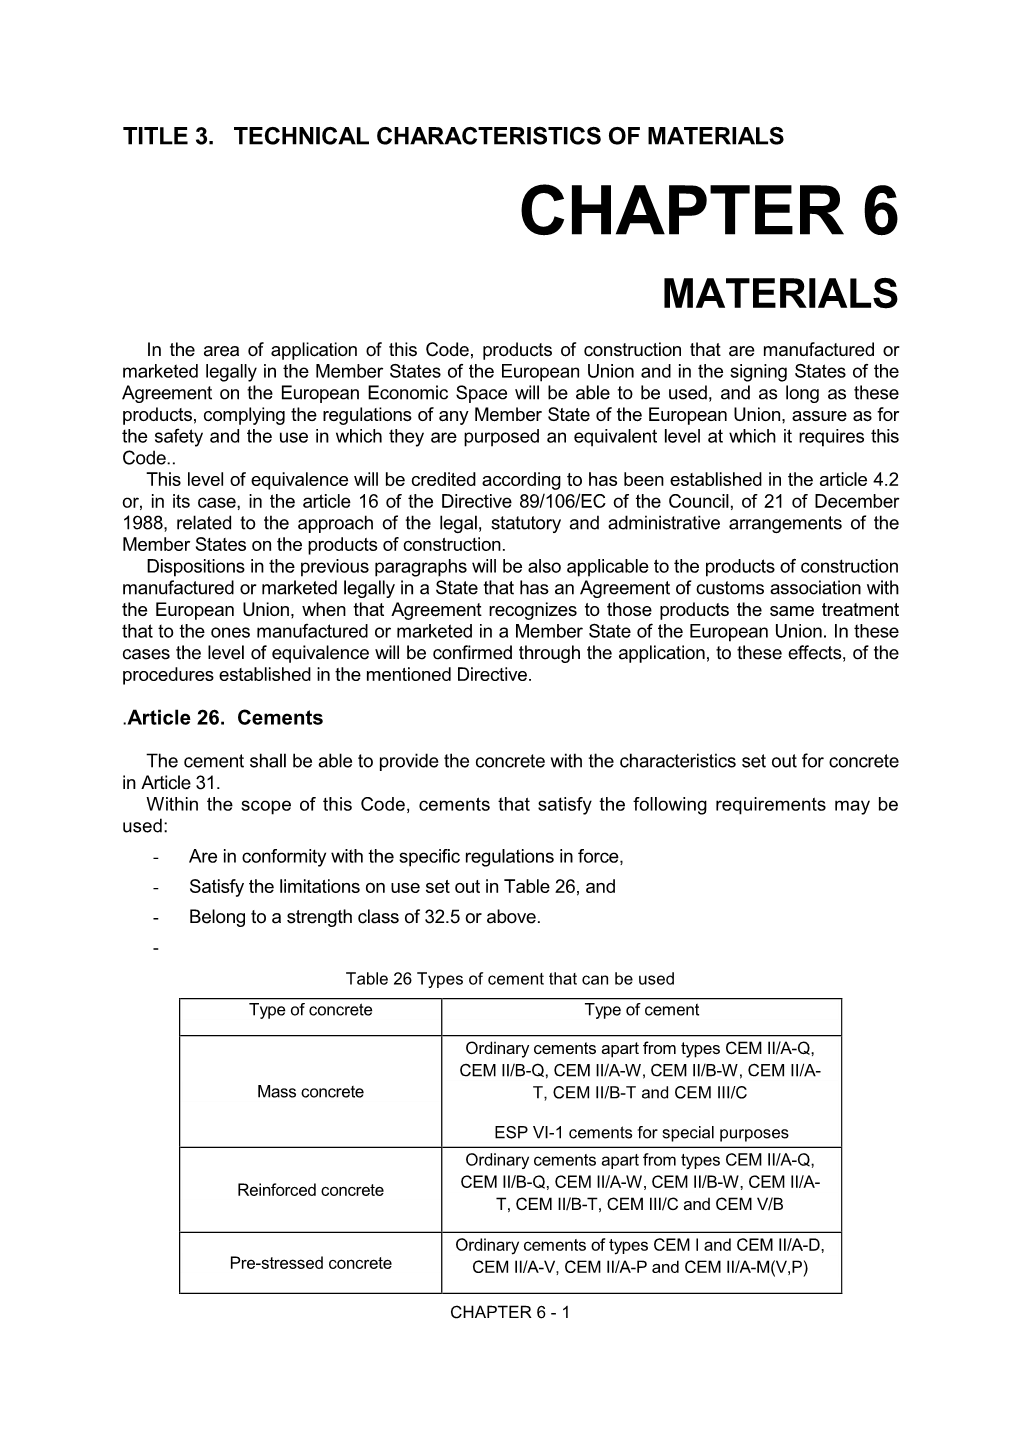 Chapter 6. Materials